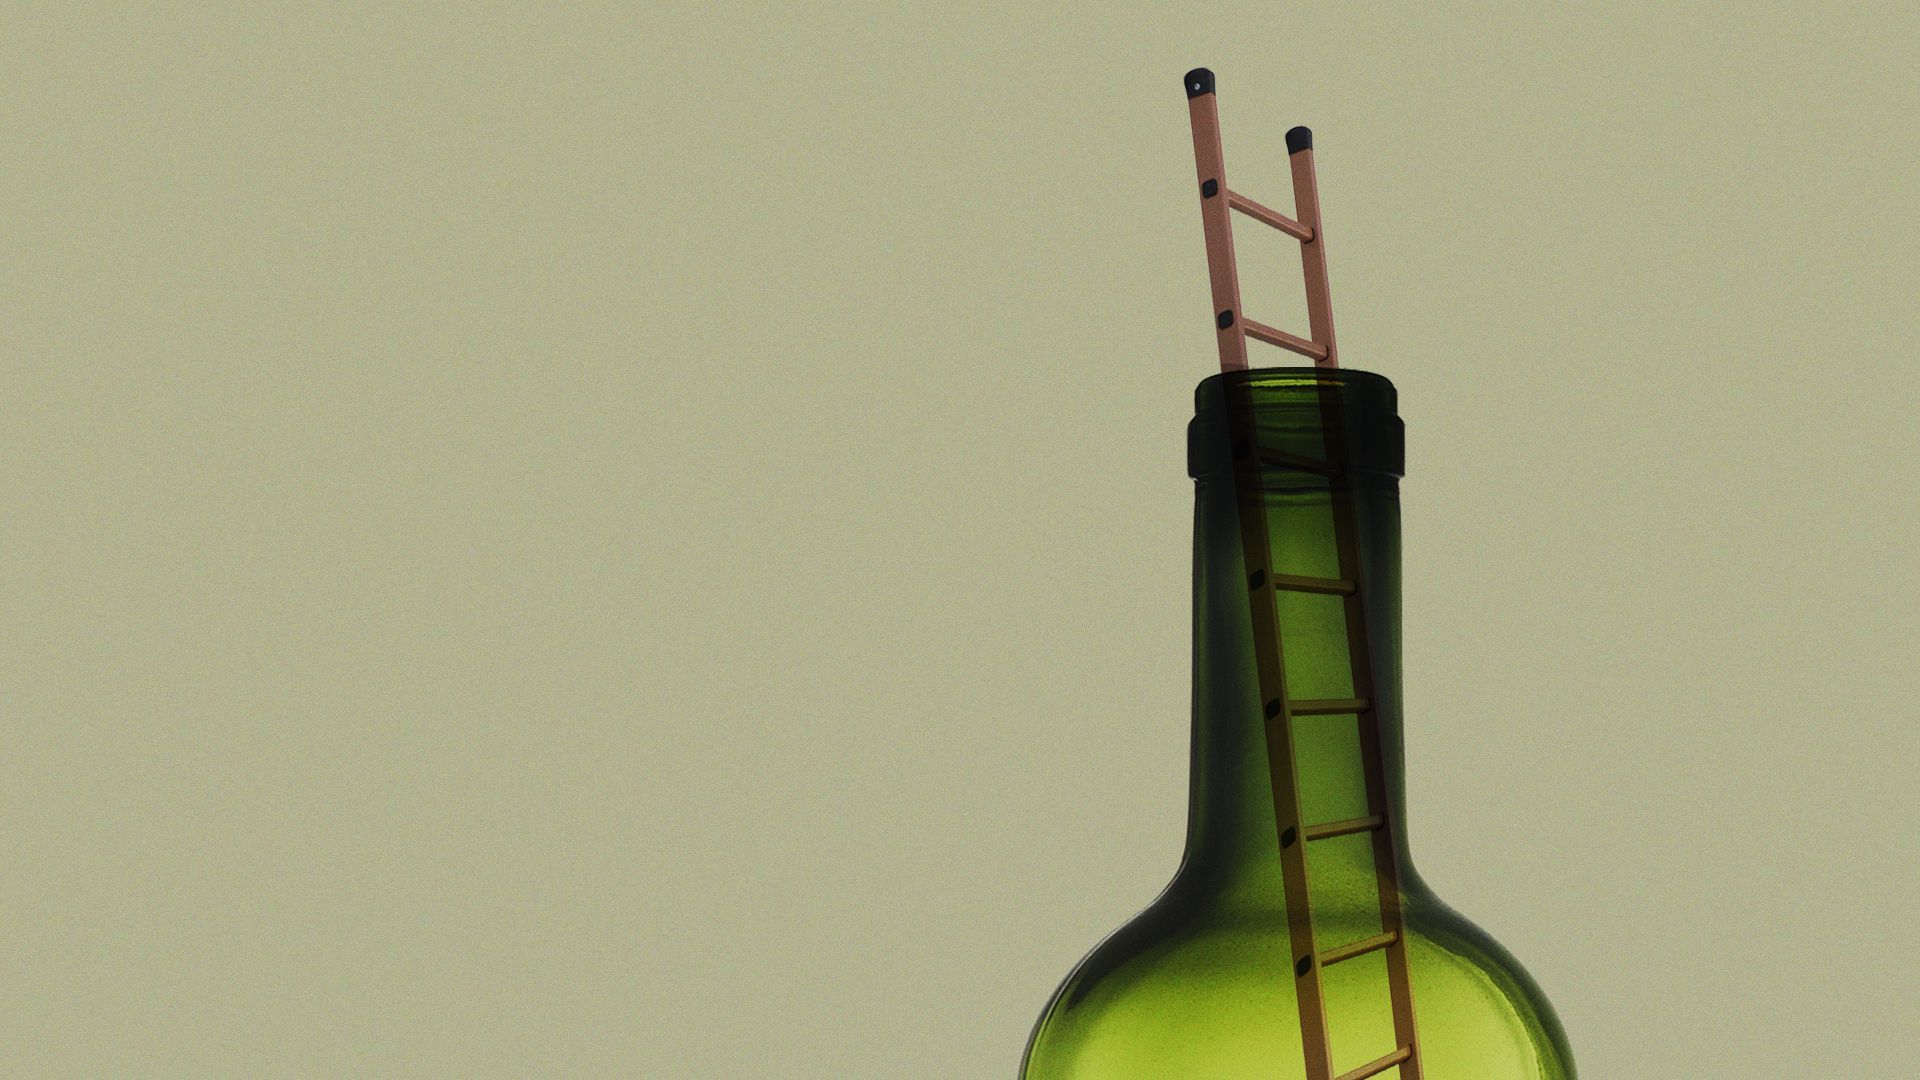 Illustration of a ladder coming out of an empty wine bottle.